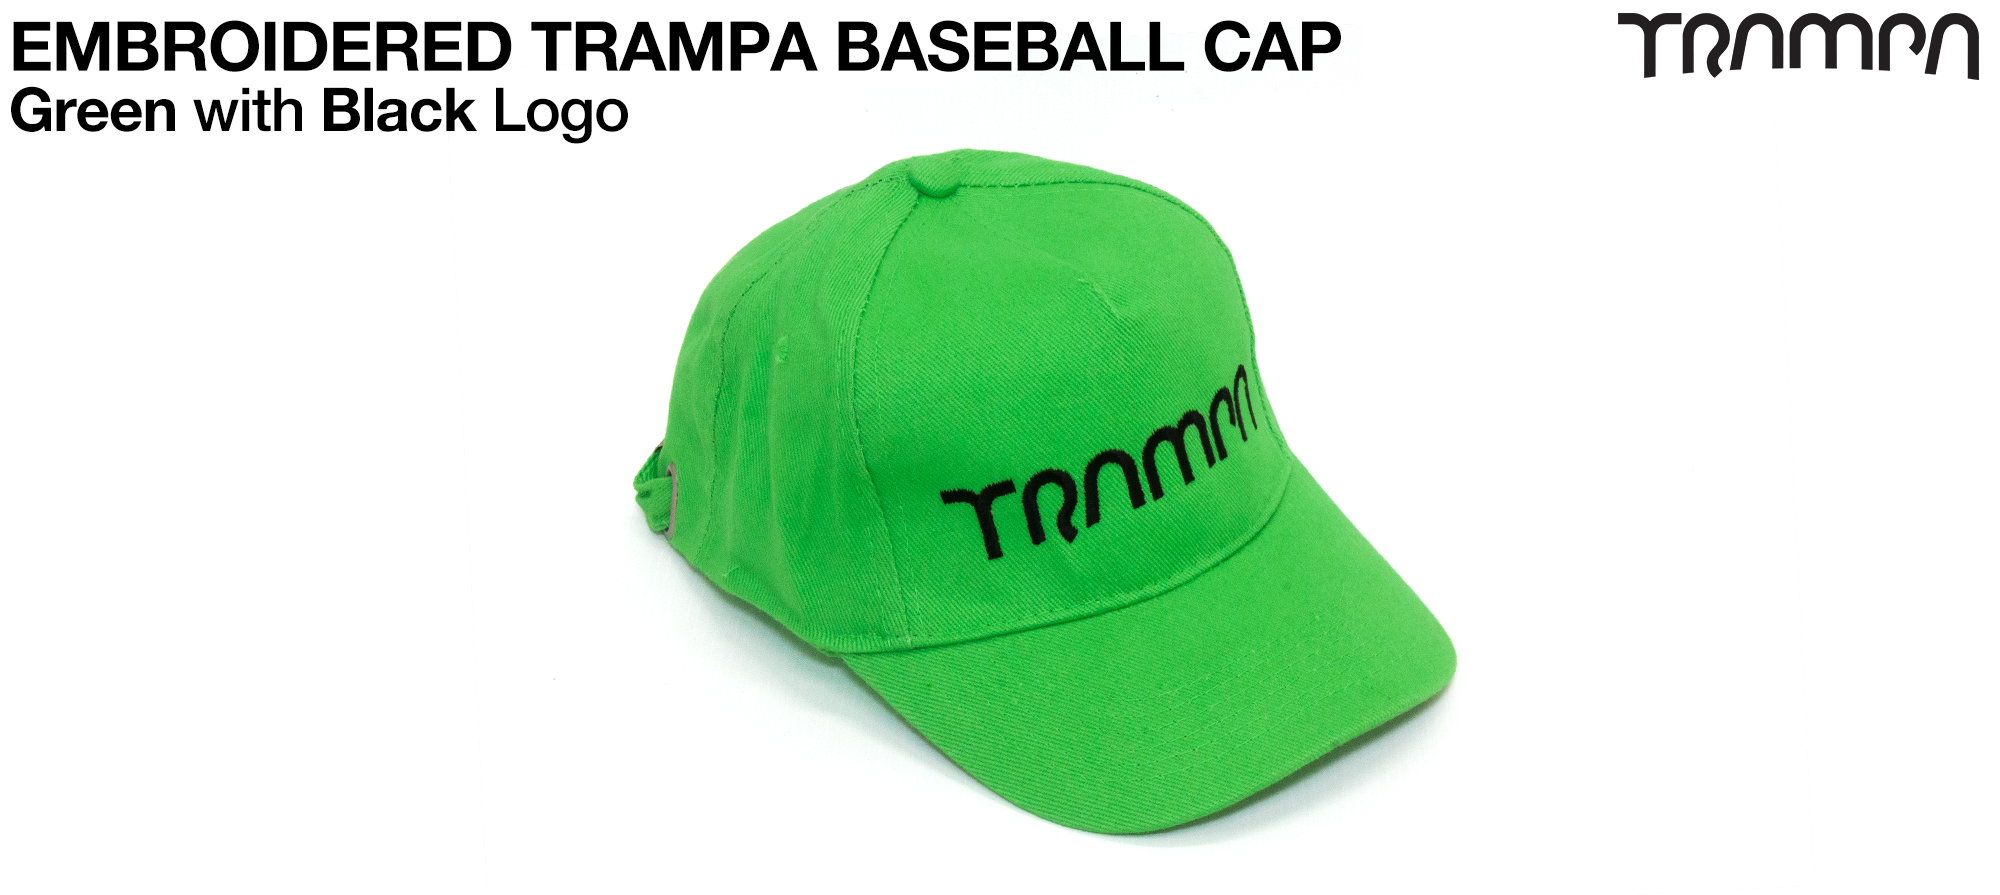 GREEN Baseball Cap with BLACK logo embroidered